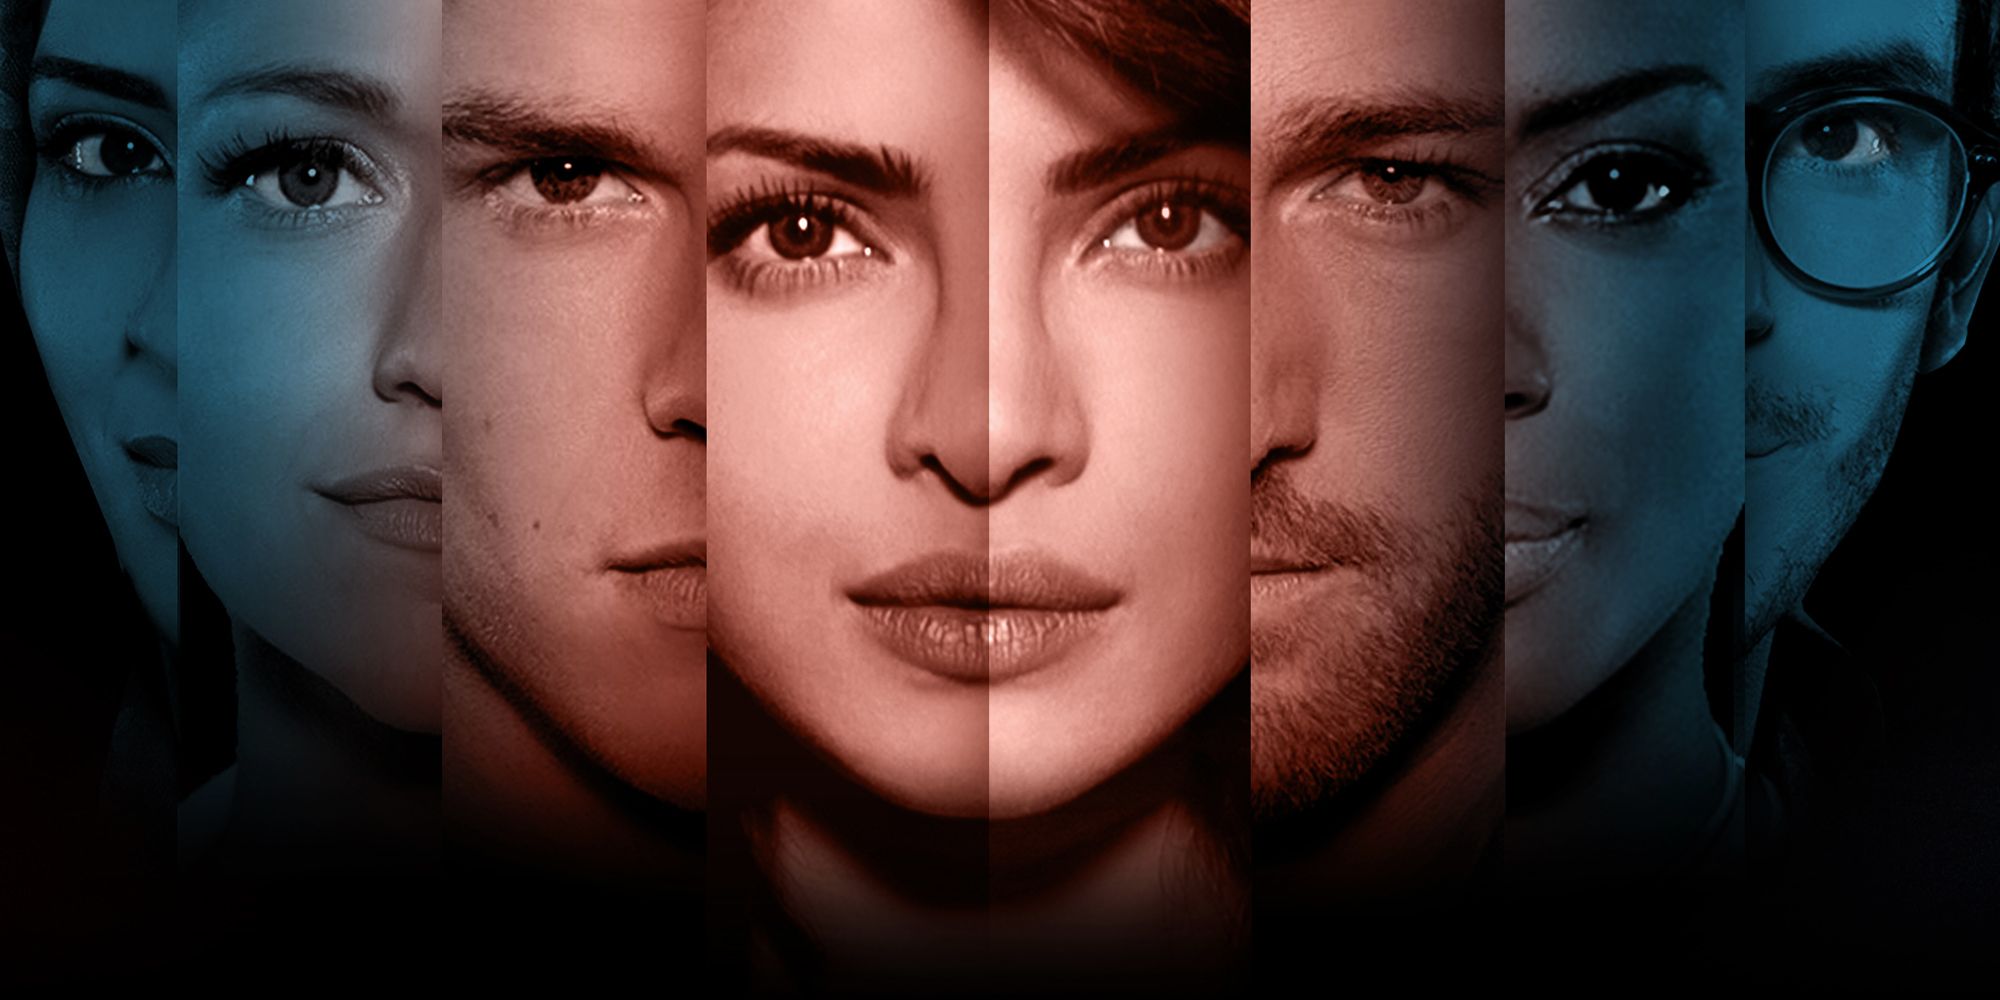 The Quantico season 2 poster features half of the faces of each of the main cast members to create a fanned image